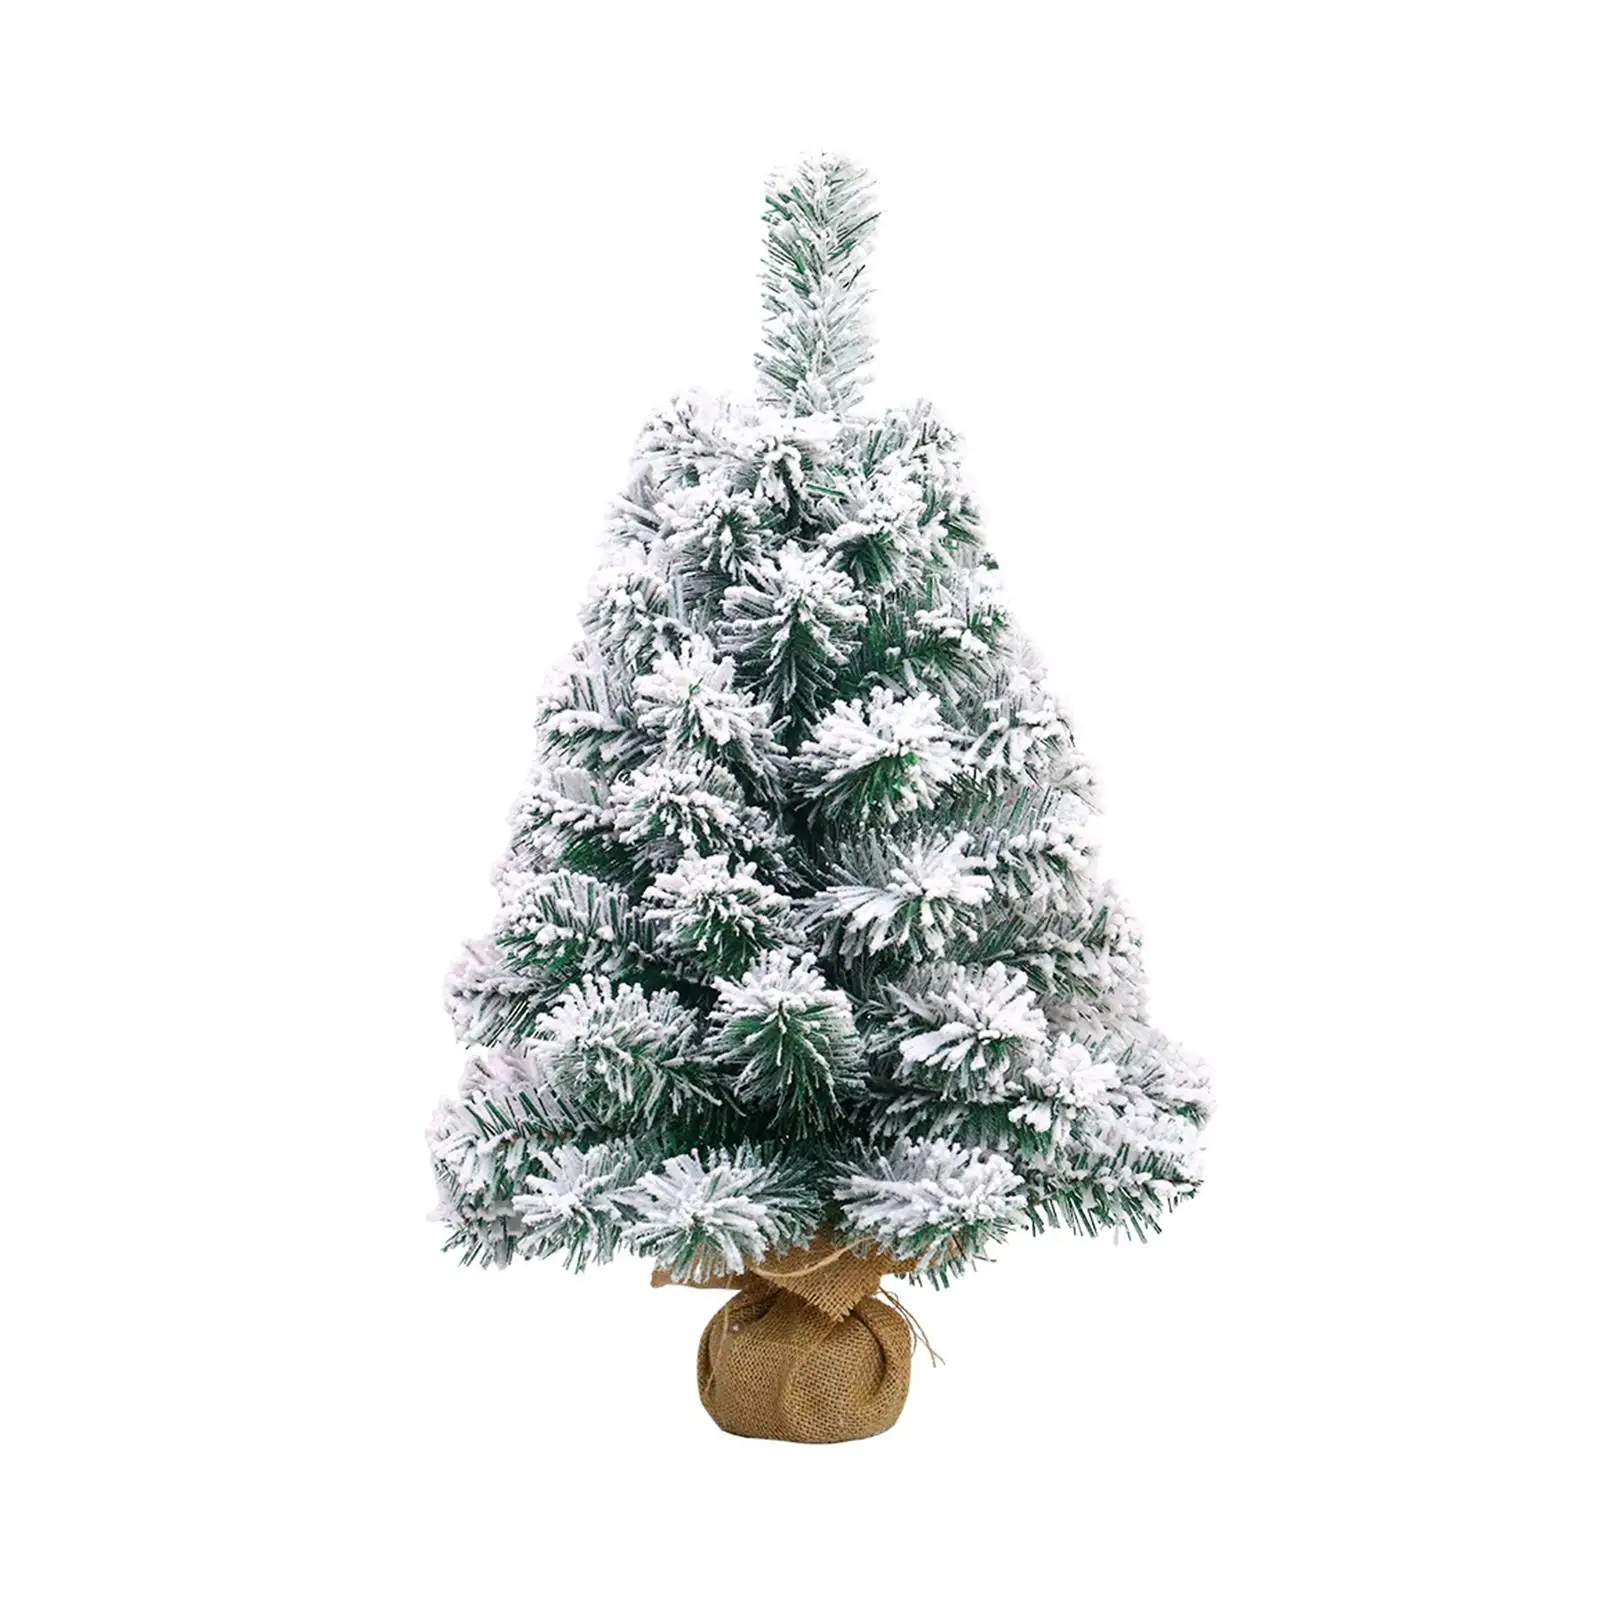 23inch Artificial Snow Flocked Christmas Tree Artificial Xmas Tree for Holiday Office Coffee Table Porch Decor